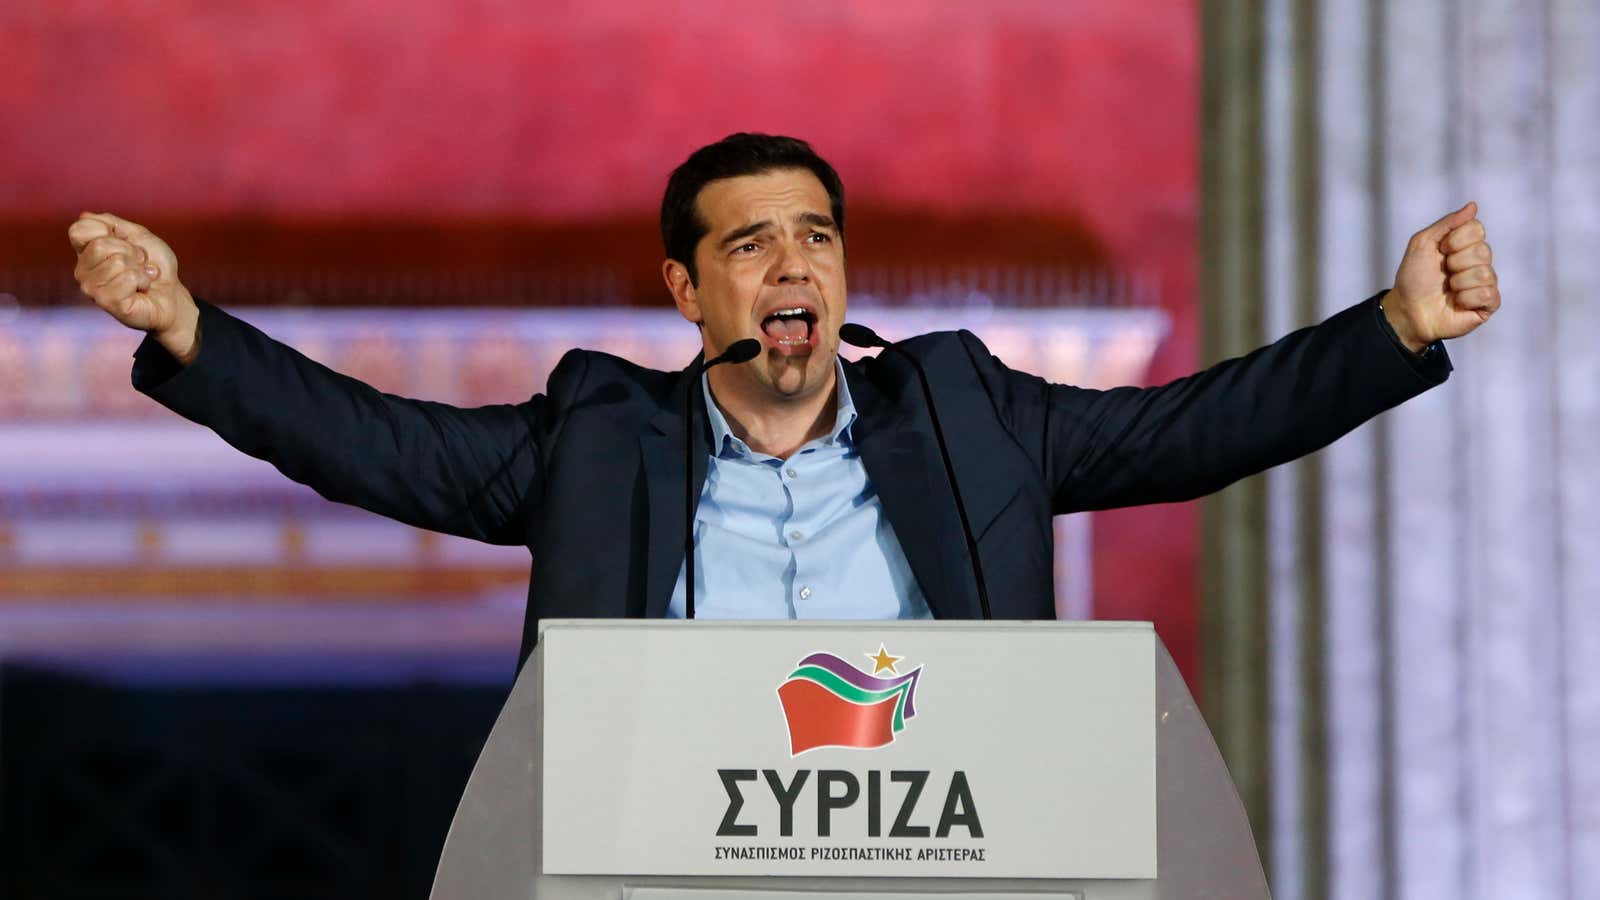 The head of radical leftist Syriza party Alexis Tsipras speaks to supporters after winning the elections in Athens.